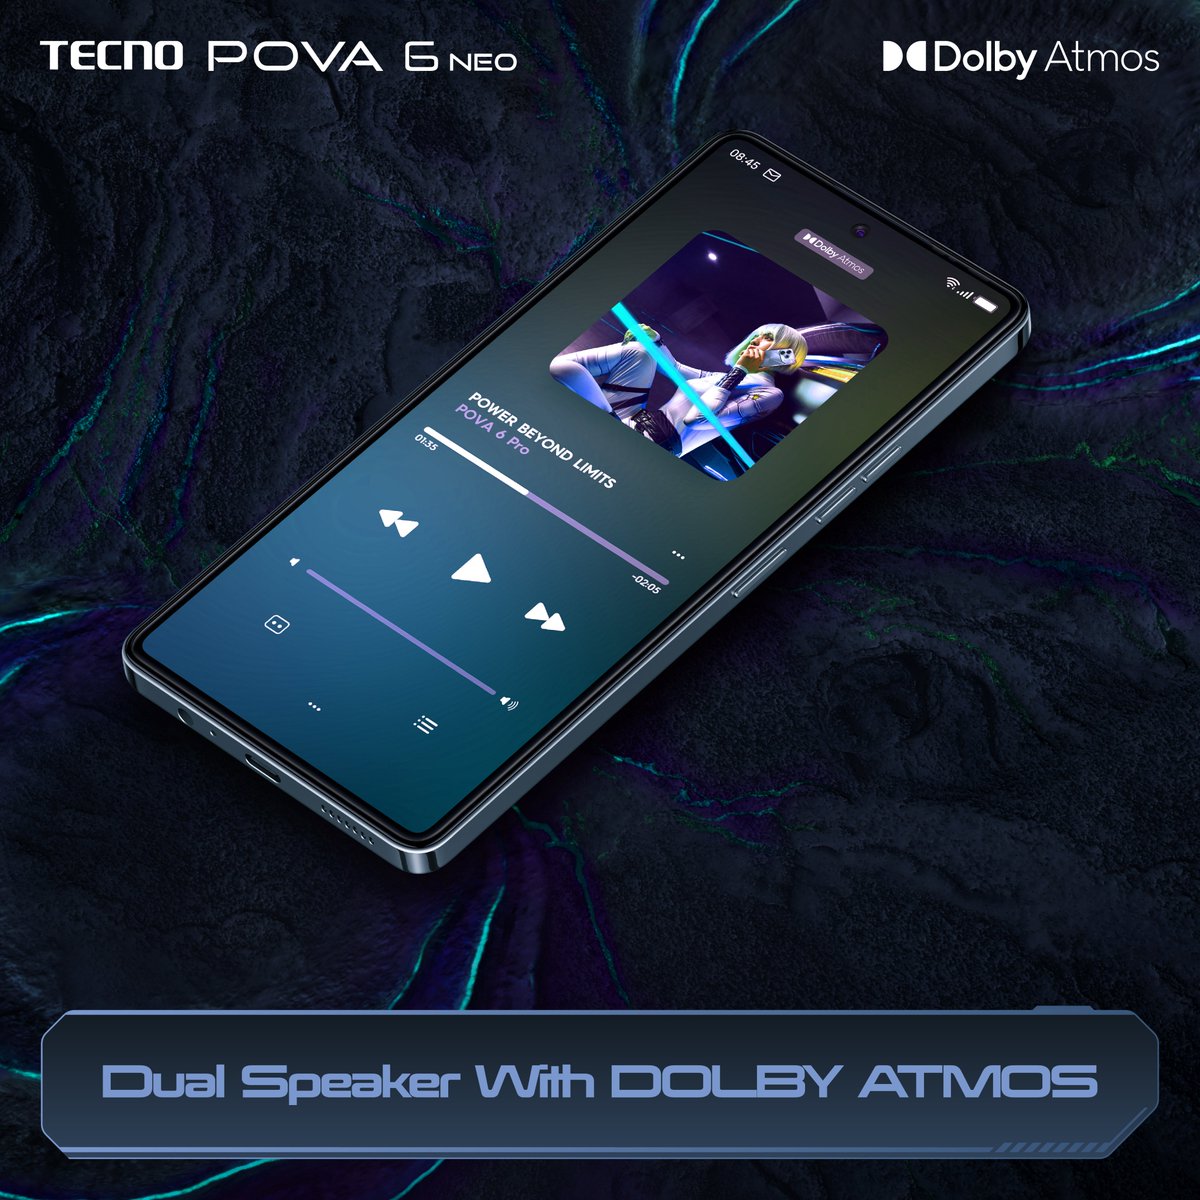 Experience sound like never before, whether you're gaming, streaming, or simply enjoying your favorite tunes with the dual speaker of the POVA 6 Neo. #POVA6Neo #PowerBeyondLimits #TECNOPova6Neo